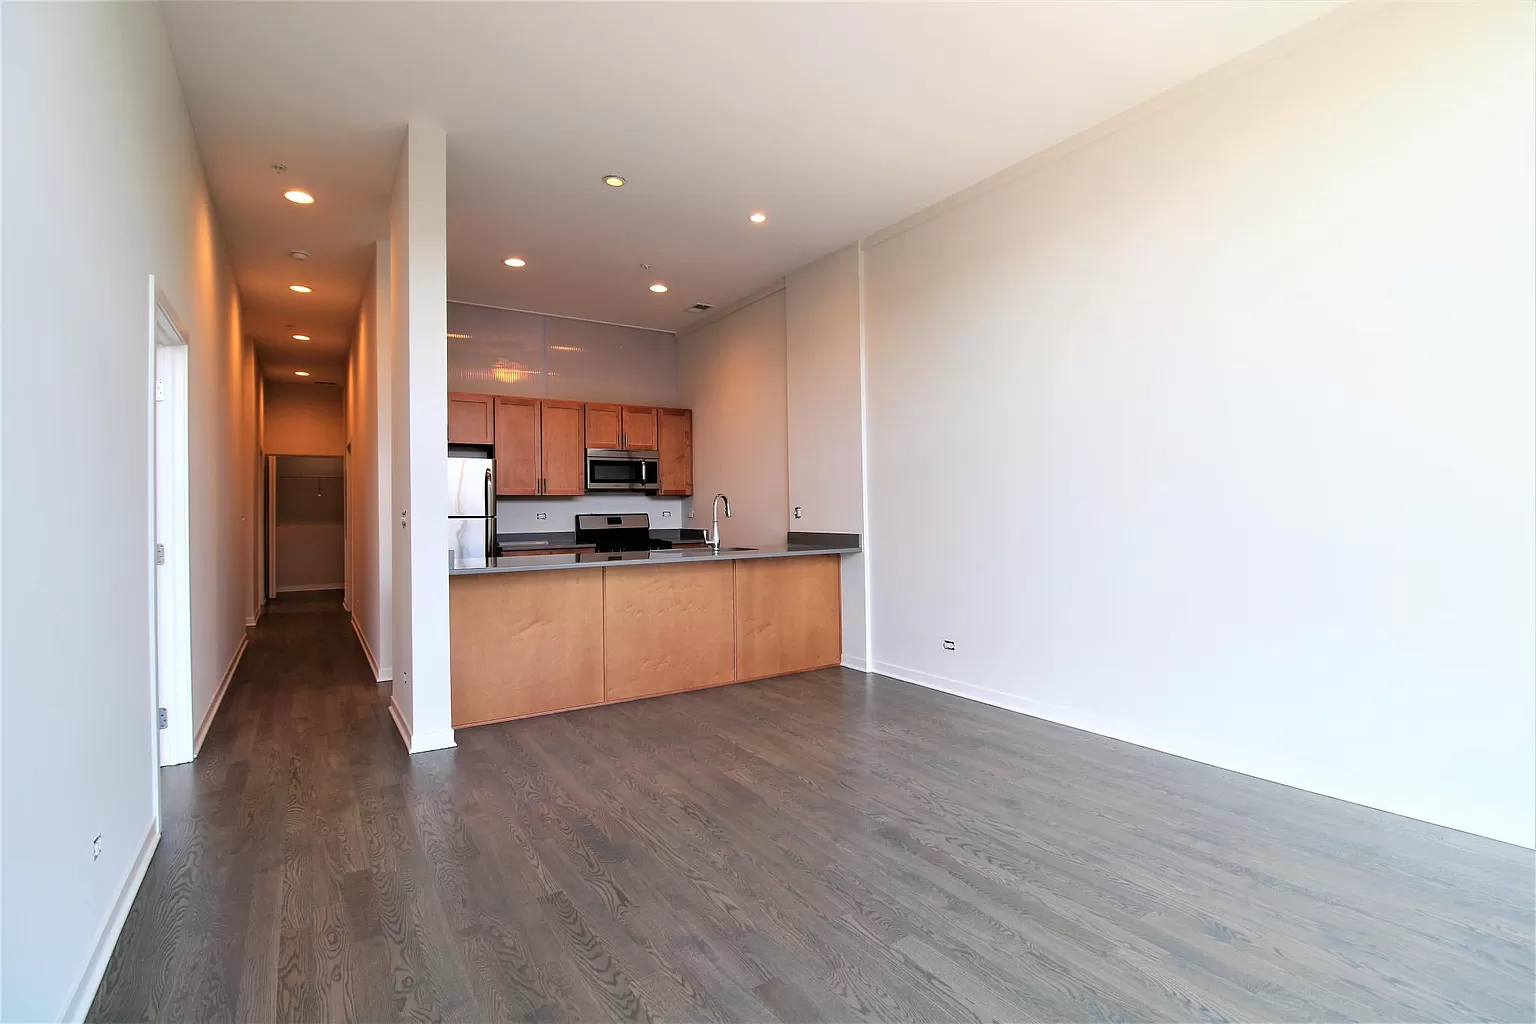 VanderCook College of Music Housing 2.5 Bed 2 bath apartment - Available for lease takeover or looking for a room mate for VanderCook College of Music Students in Chicago, IL